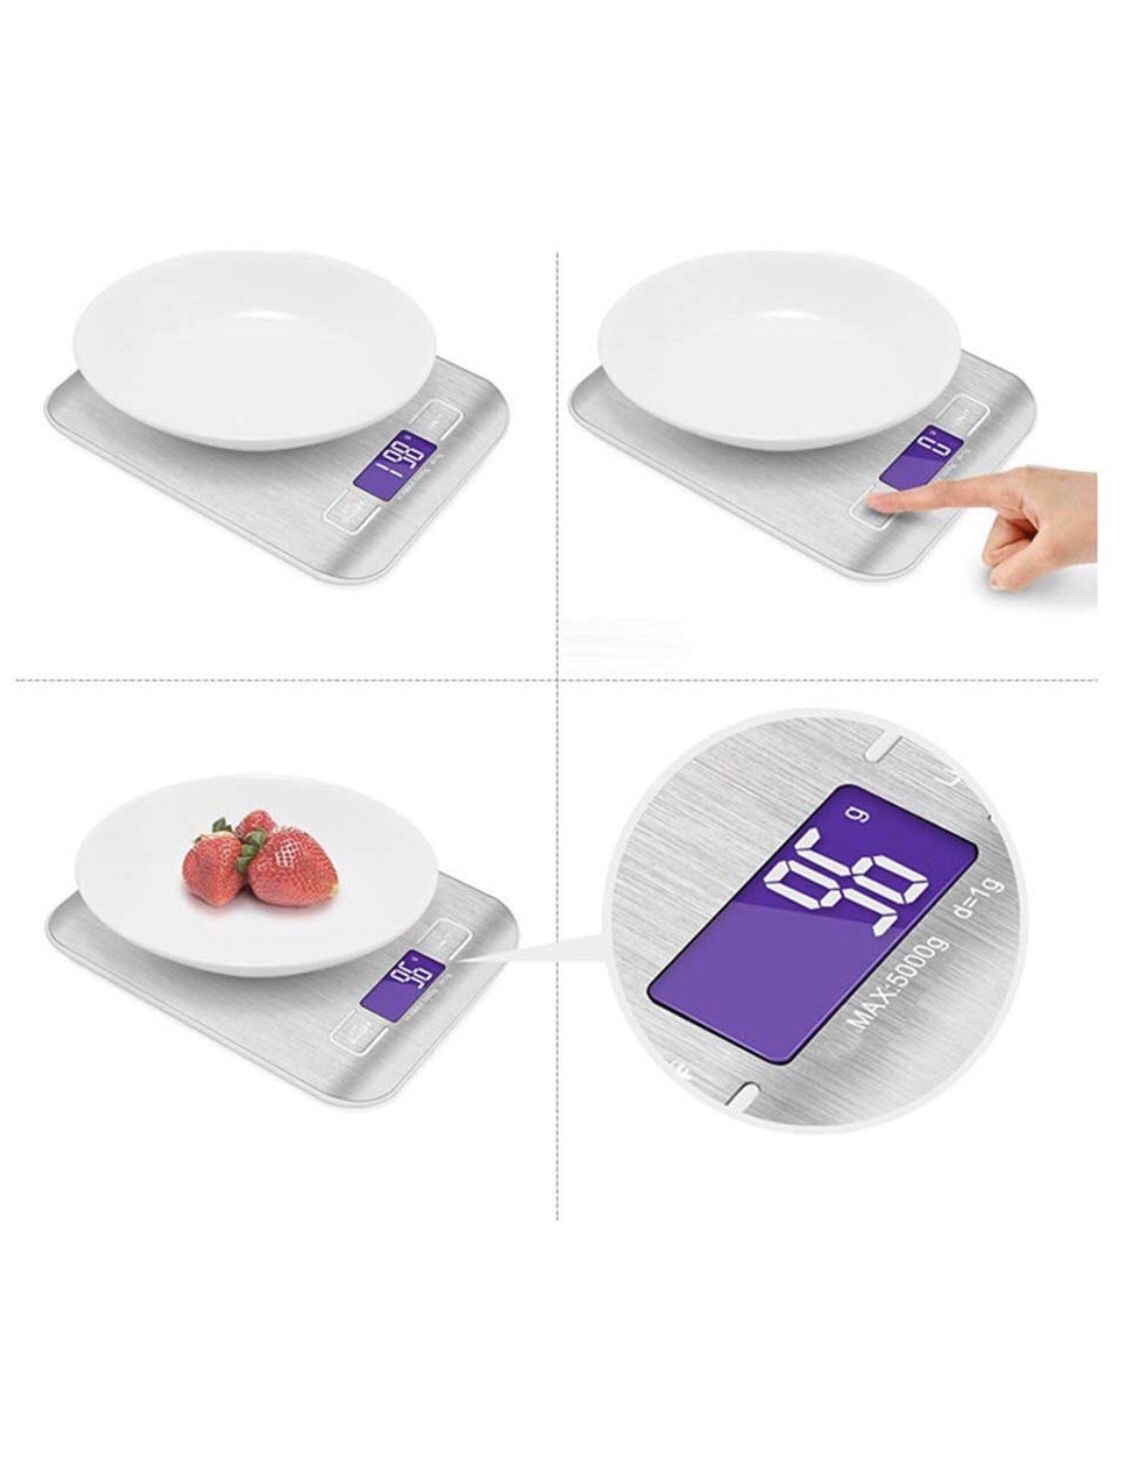 💰1⃣️0⃣️ Digital Kitchen Food Scale Stainless Steel Multifunction Food Scales,with LCD Display for Cooking - Silver